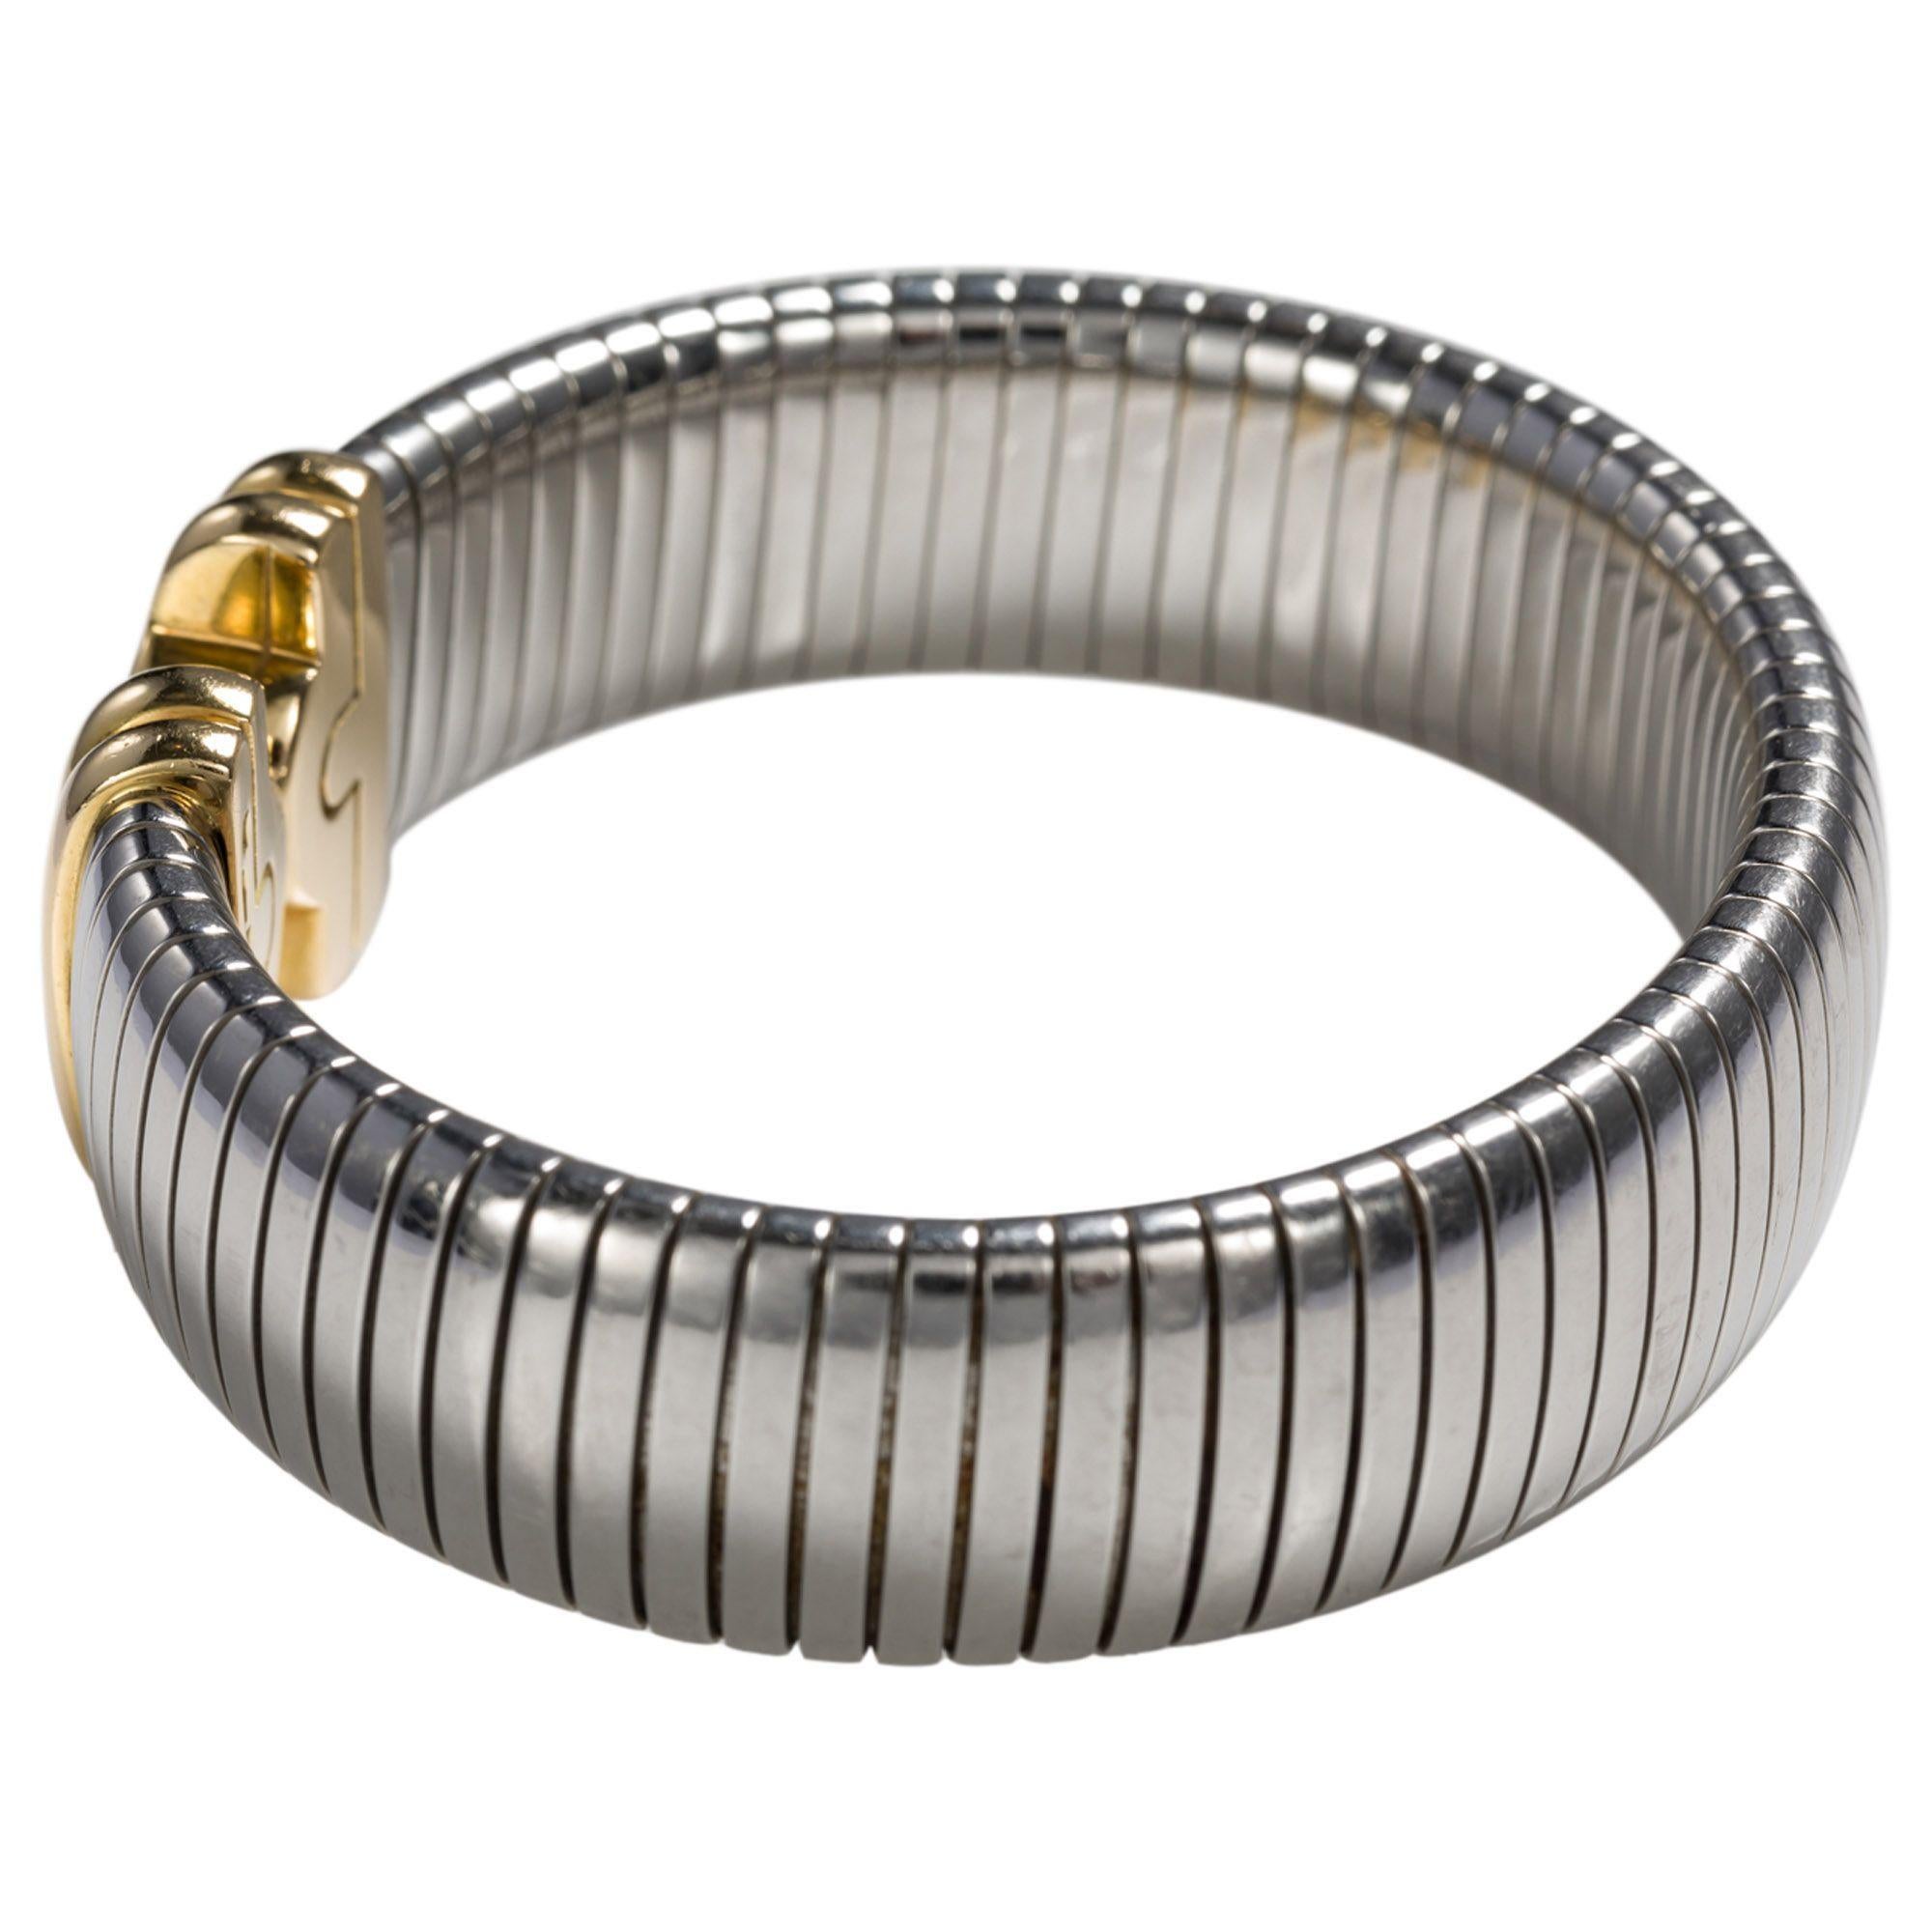 Bulgari, the Italian jeweller renowned for being worn by the world's most fashionable icons. A timeless style in 18k yellow gold and stainless steel, a wearable piece for everyday. The Tubogas style is easy to wear on the wrist, comfortable and